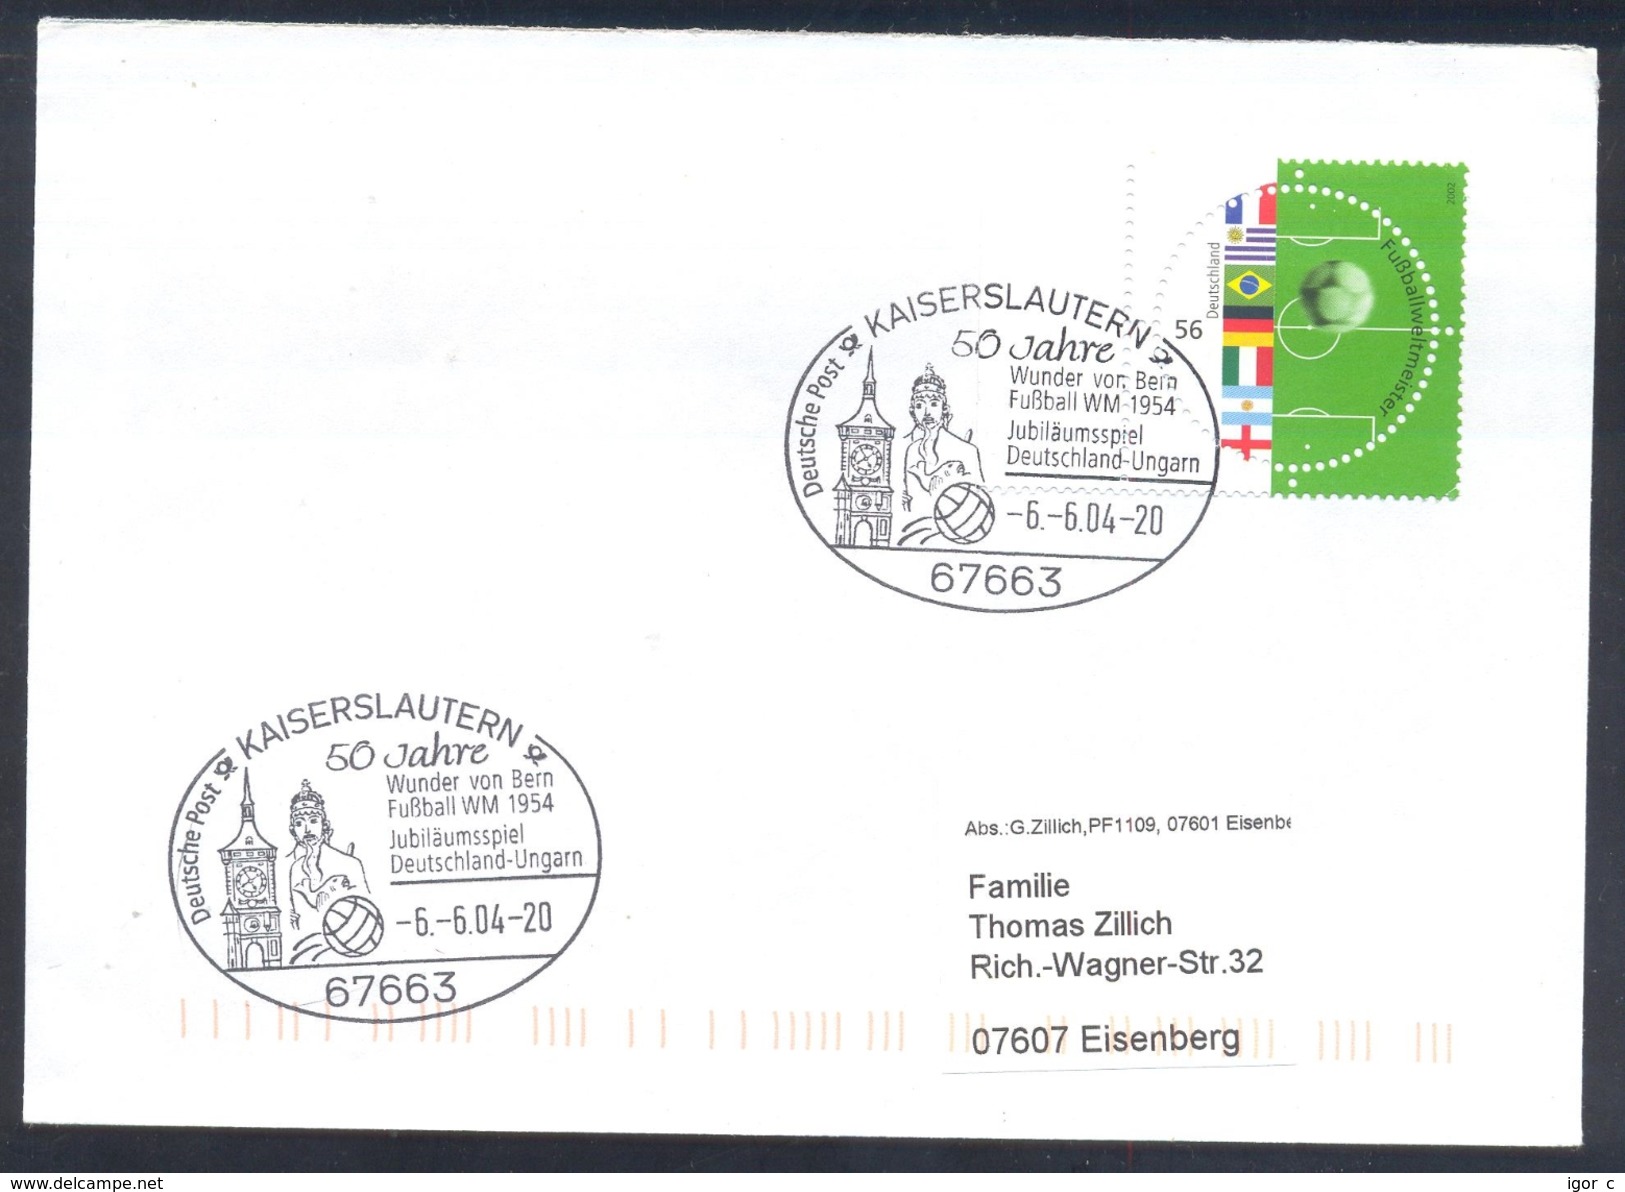 Germany 2004 Cover: Football Fussball Soccer Calcio; Das Wunder Von Bern; World Cup Weltmeisterschaft Germany - Hungary - 1954 – Suisse